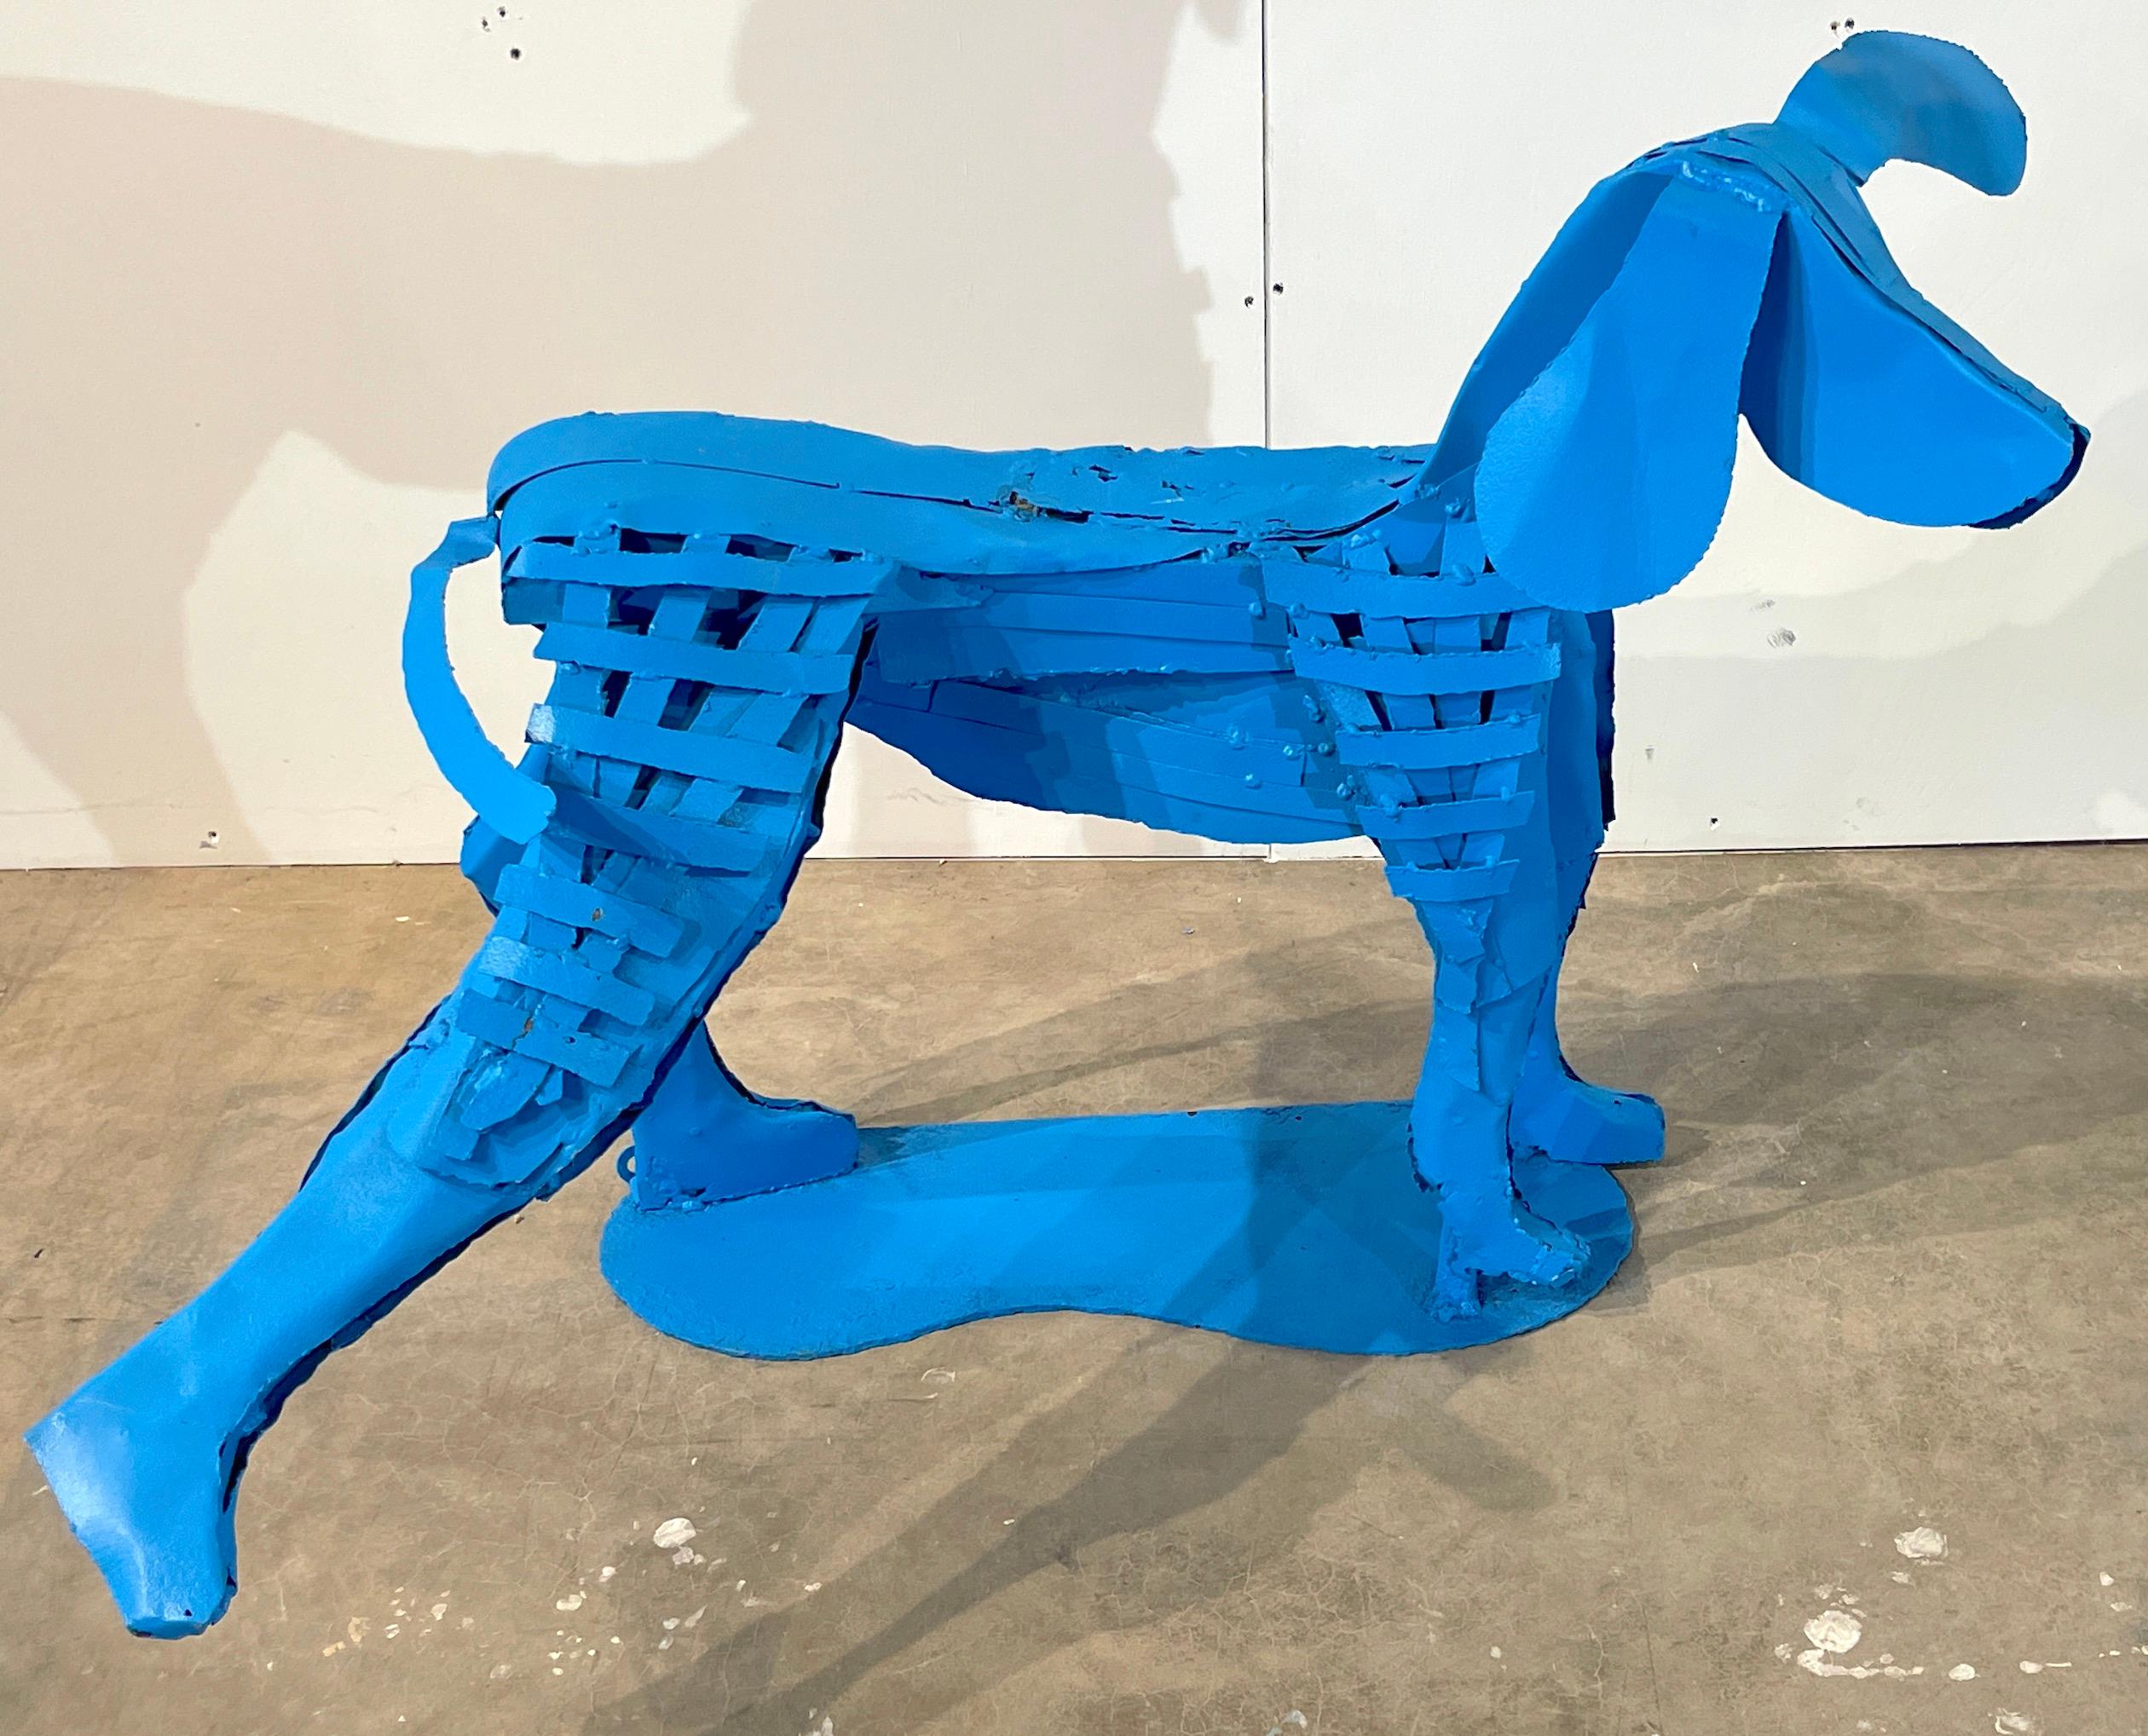 Pop Art Garden Fountain/ sculpture of a standing blue dog 
USA, circa 1980s

Definitely an amusing and whimsical garden (can be used indoors) fountain/sculpture, The well executed sculpture of a canine with one leg lifted. It has the option to